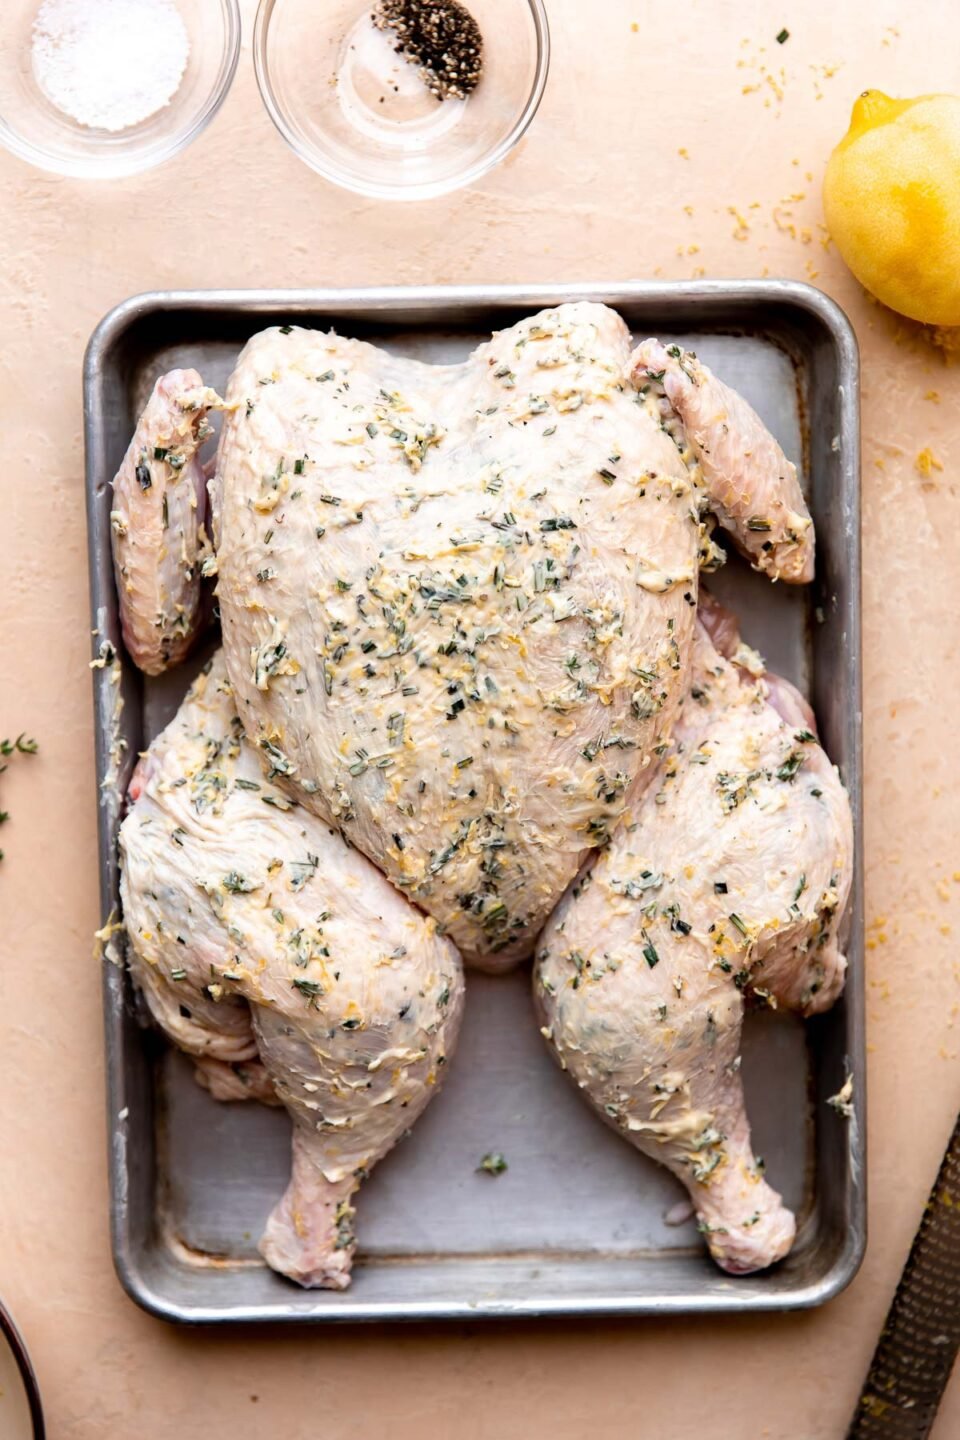 How to make lemon spatchcock chicken, step 3: Butter the spatchcock chicken. A spatchcock chicken lays flat atop an aluminum baking sheet that sits atop a cream colored textured surface. The spatchcock chicken has been covered in homemade lemon herb butter. Two clear glass pinch bowls are filled with kosher salt & ground black pepper, a lemon that has been zested, and a microplane surround the bowl at center.